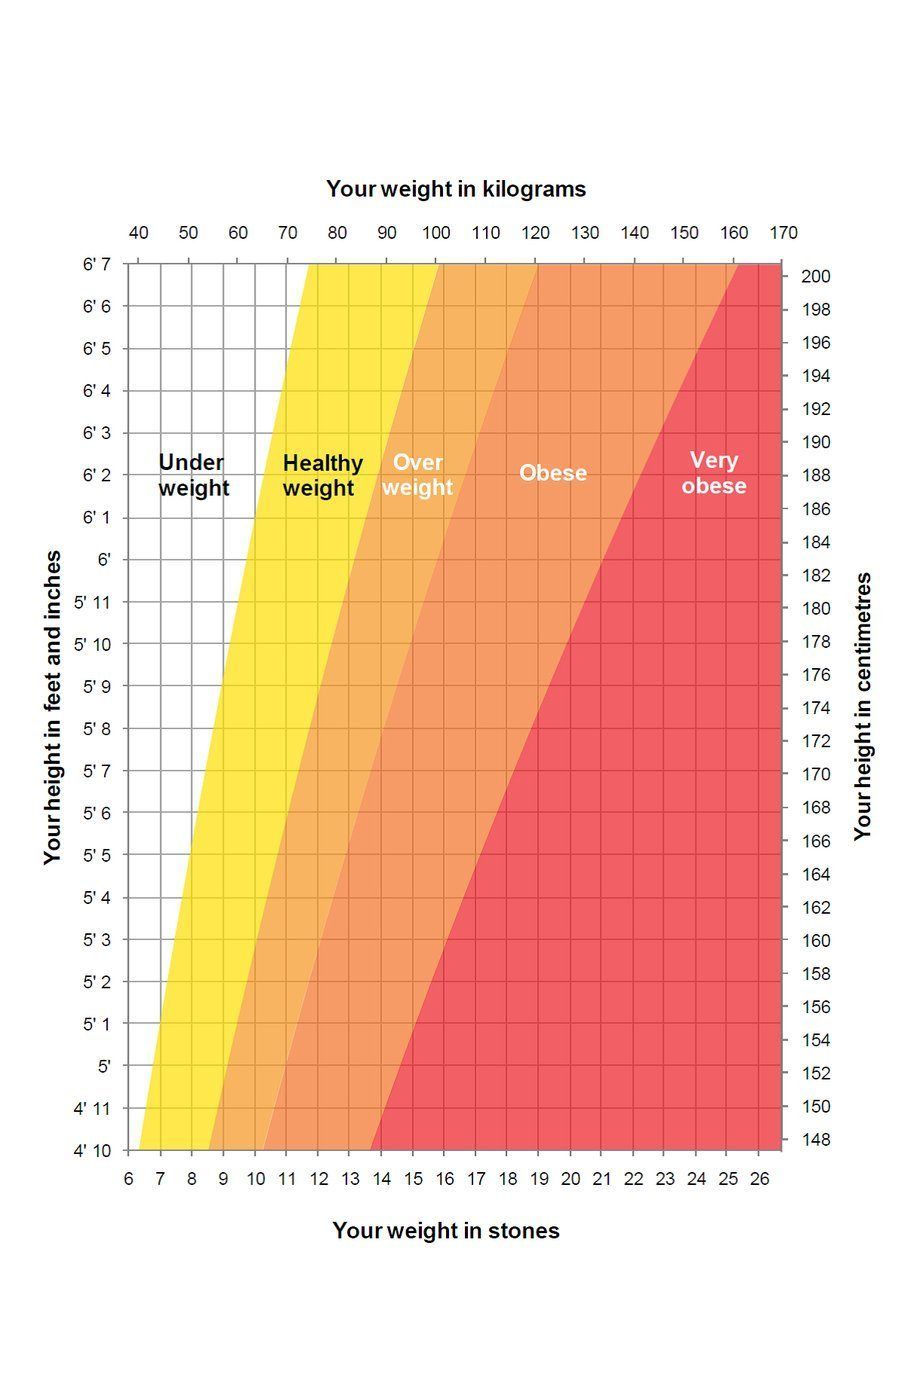 Average height and weight for adults